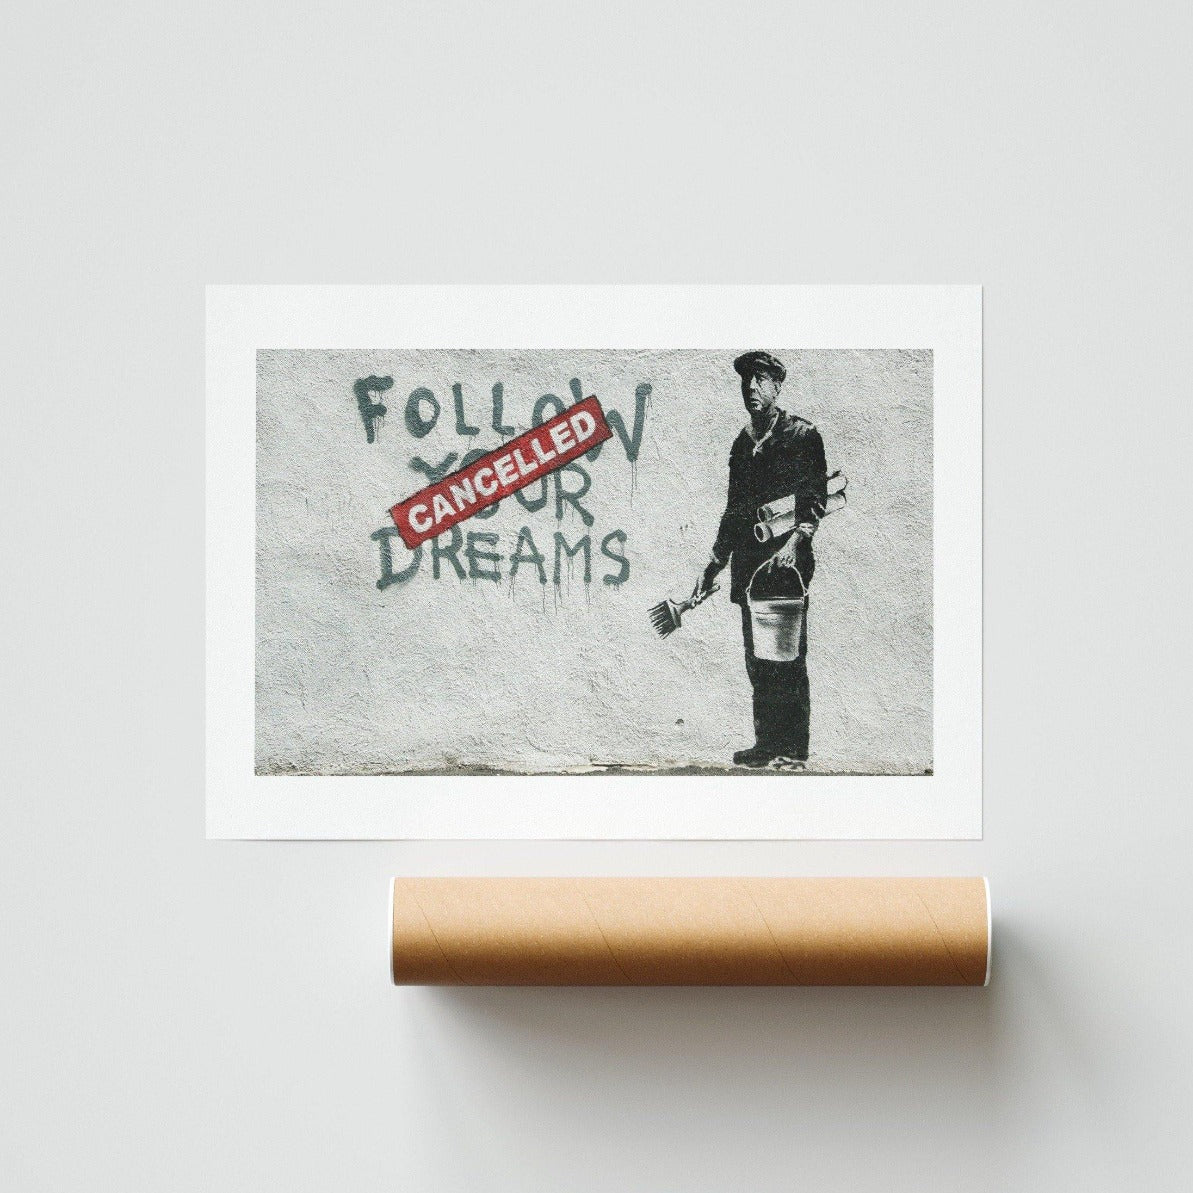 The perfect piece of street art for your home, office, or studio. This Follow Your Dreams Banksy piece will inspire you to pursue your passions. The vibrant colors and bold lines of this street art will add a touch of personality to any space. Whether you're a Banksy fan or just appreciate good street art, this piece is sure to add some life to your decor.- 98types